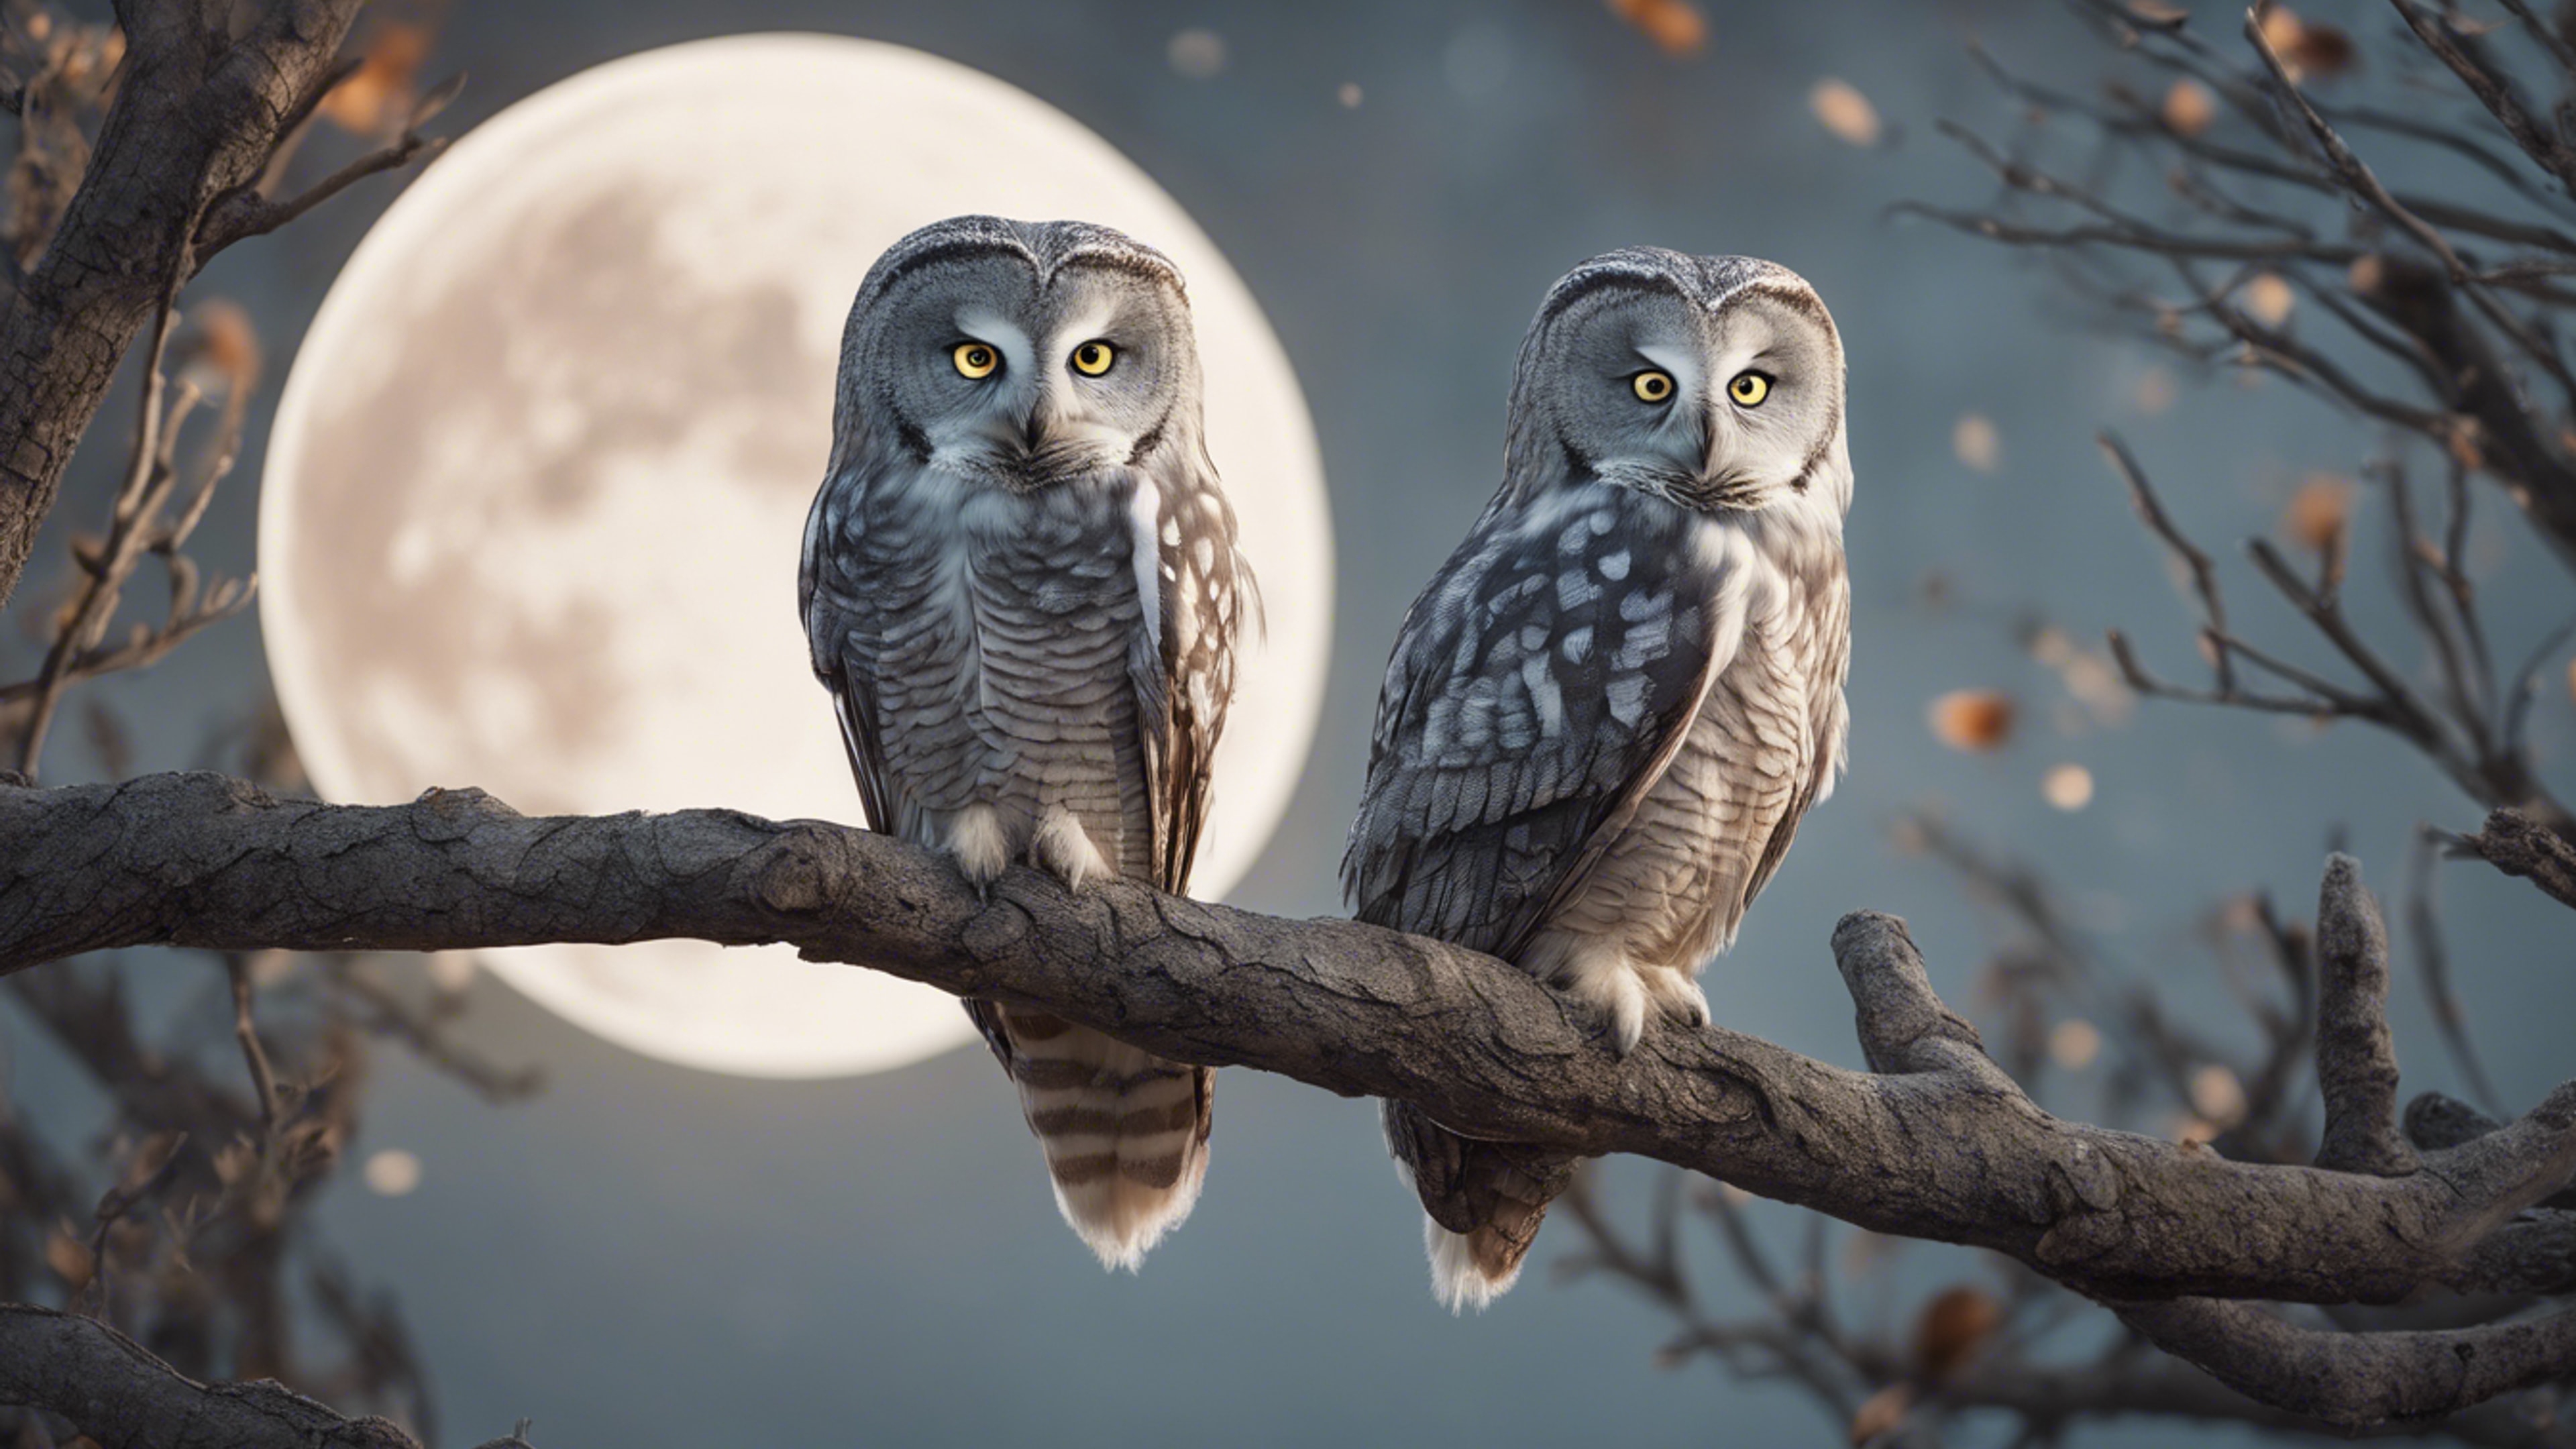 A cute, small grey and white owl perched on a tree branch, with a big, round moon in the background. Wallpaper[93ab64fcc33645f3a711]